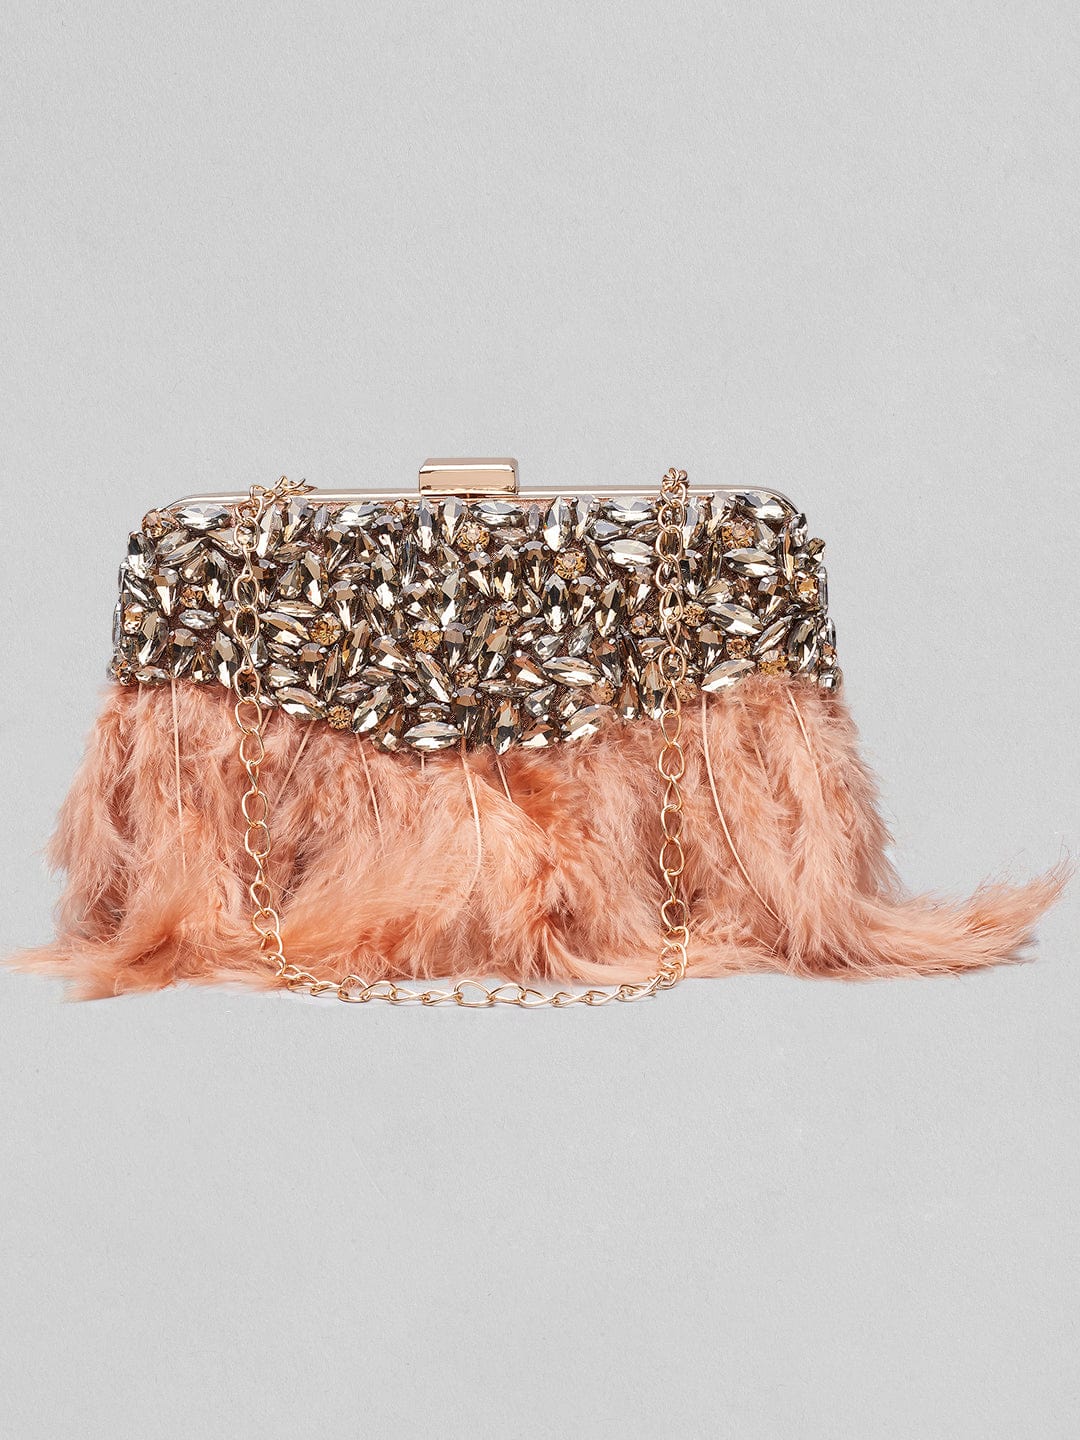 Rubans Brown Colour Clutch Bag With Studded Stone And Brown Fur. Handbag &amp; Wallet Accessories